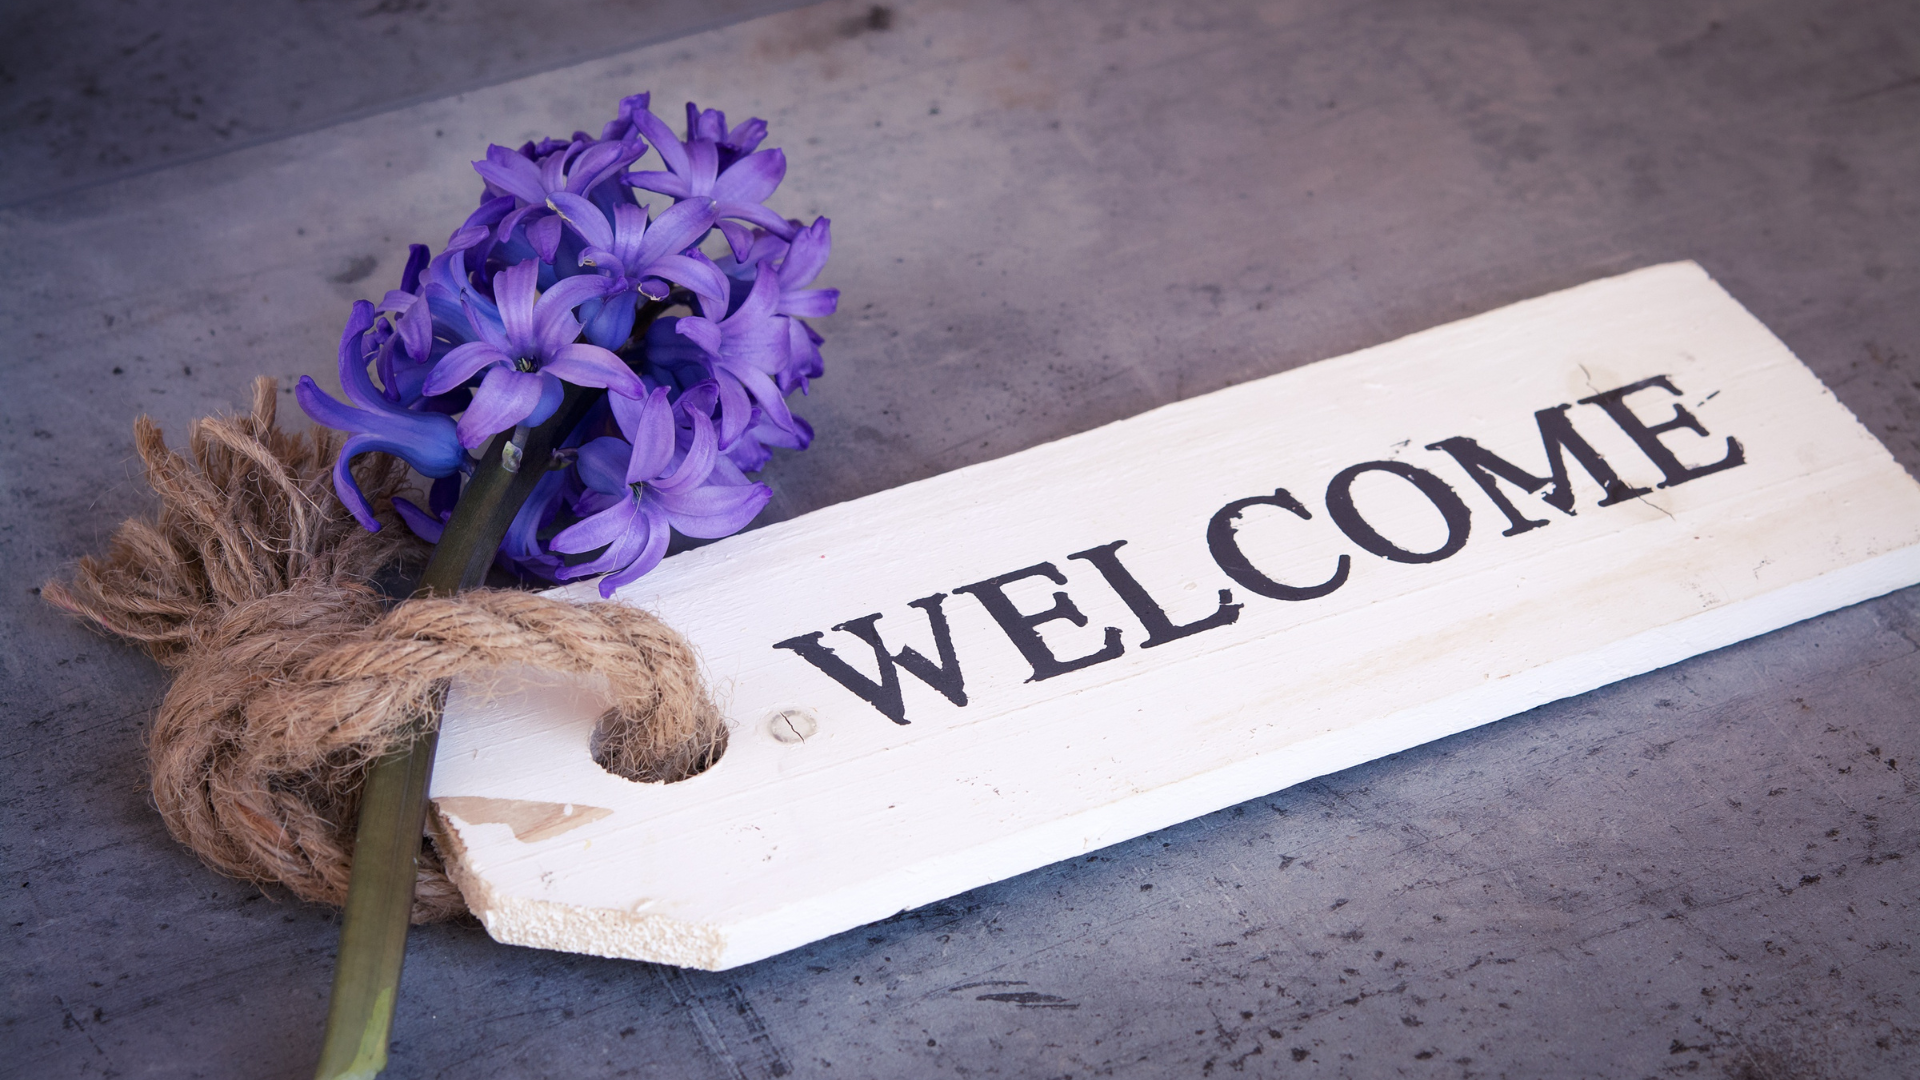 Wooden tag saying "Welcome" with a purple flower next to it